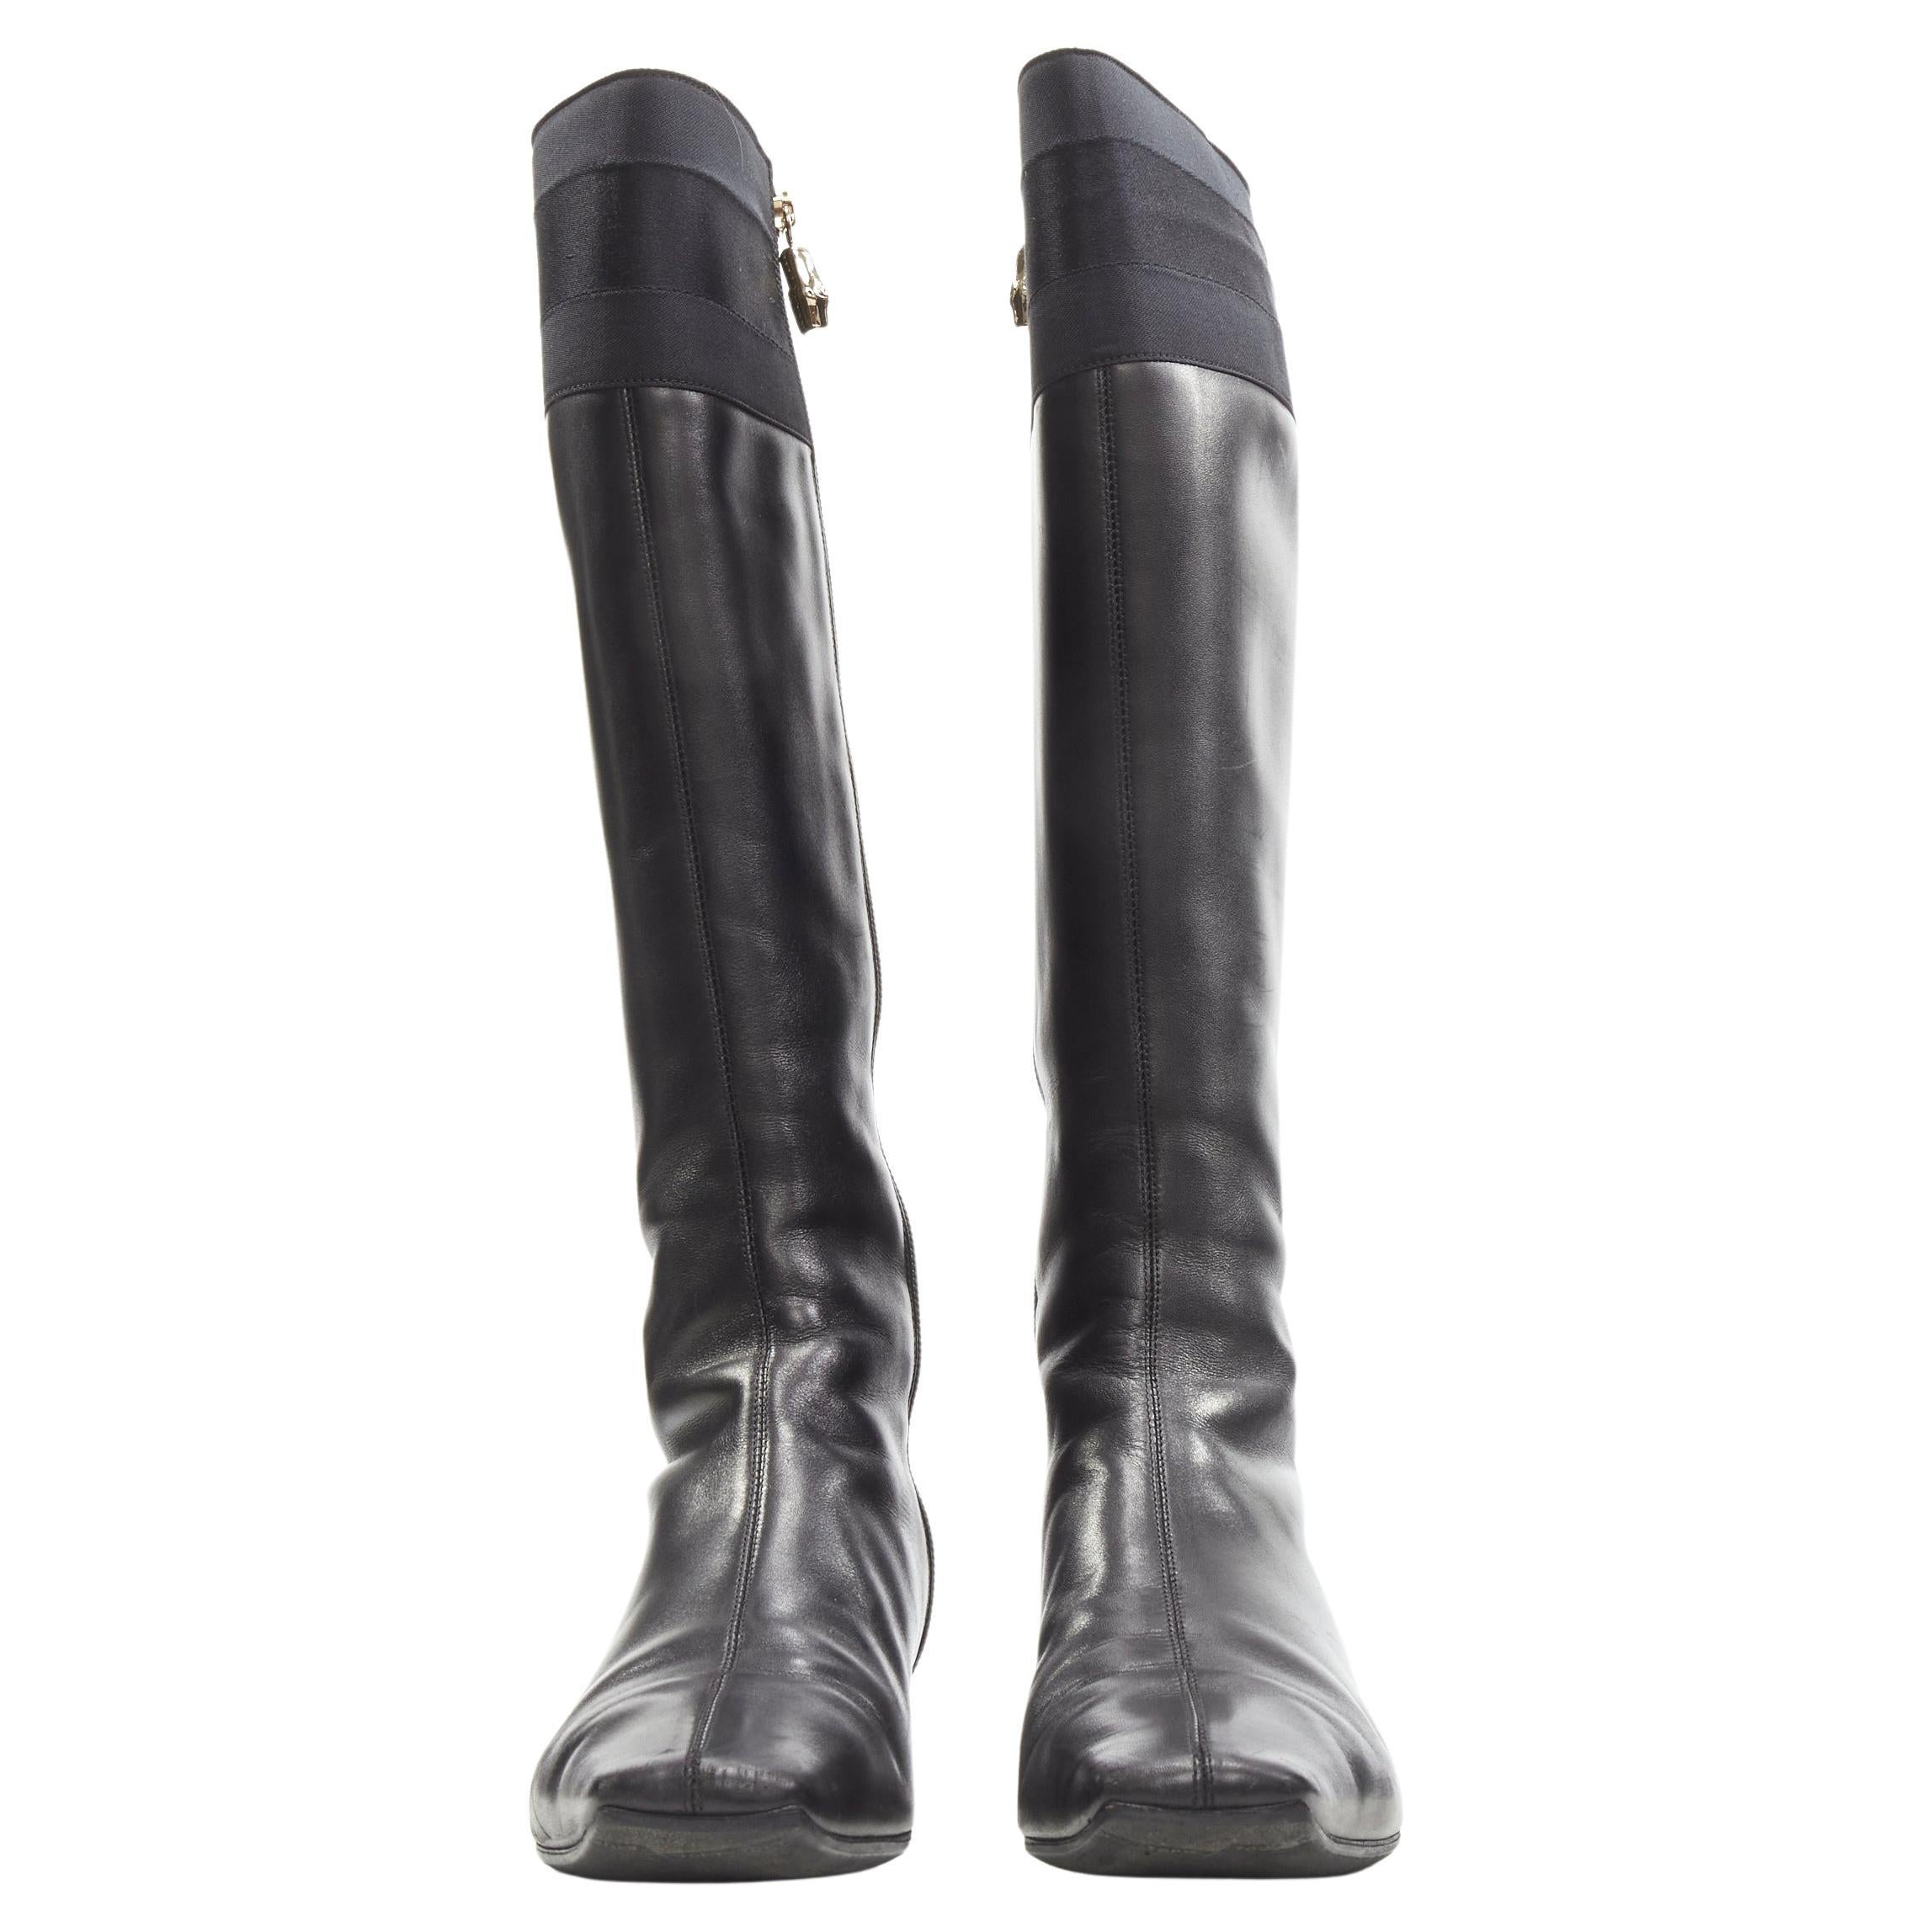 GUCCI black web trim leather gold bamboo charm zip riding boots EU36
Brand: Gucci
Material: Leather
Color: Black
Pattern: Solid
Closure: Zip
Extra Detail: Gold-tone Bamboo zipper pull. Square toe.
Made in: Italy

CONDITION:
Condition: Good, this